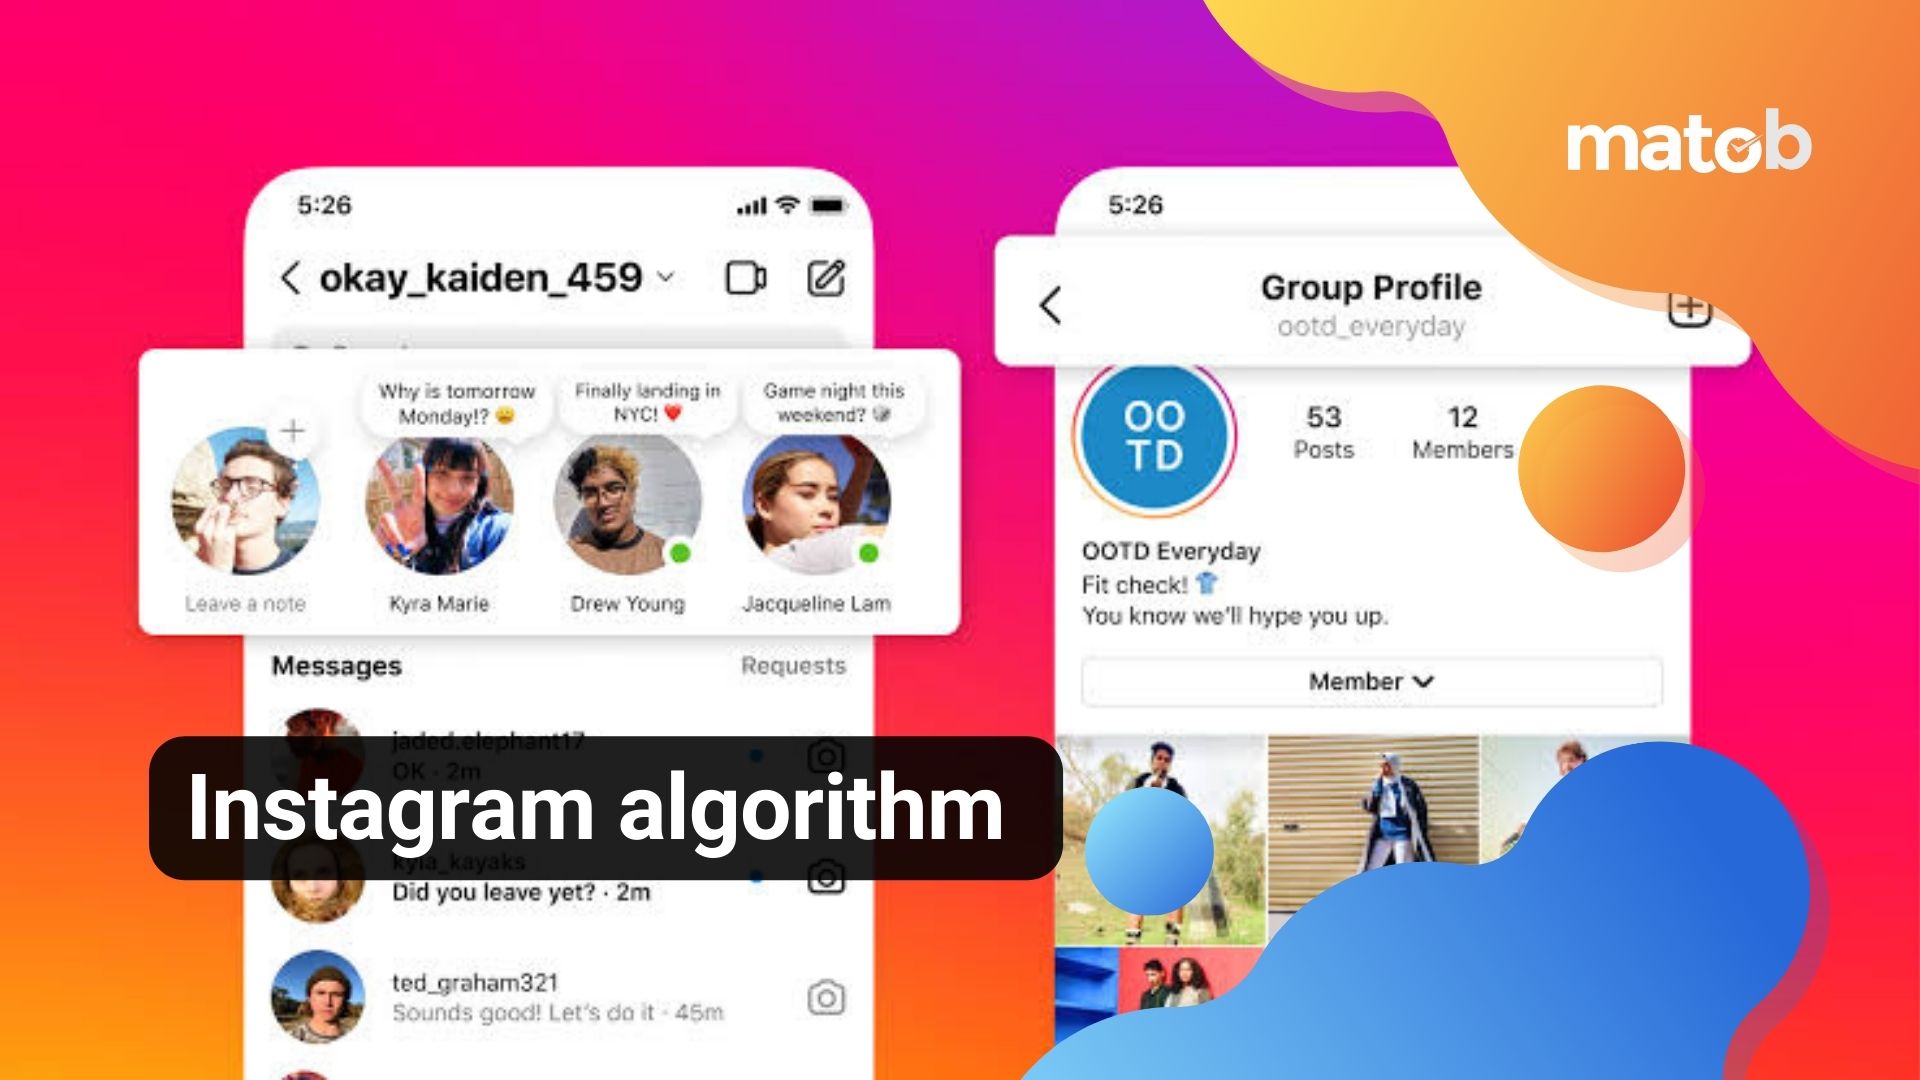 A deeper look into the Instagram algorithm